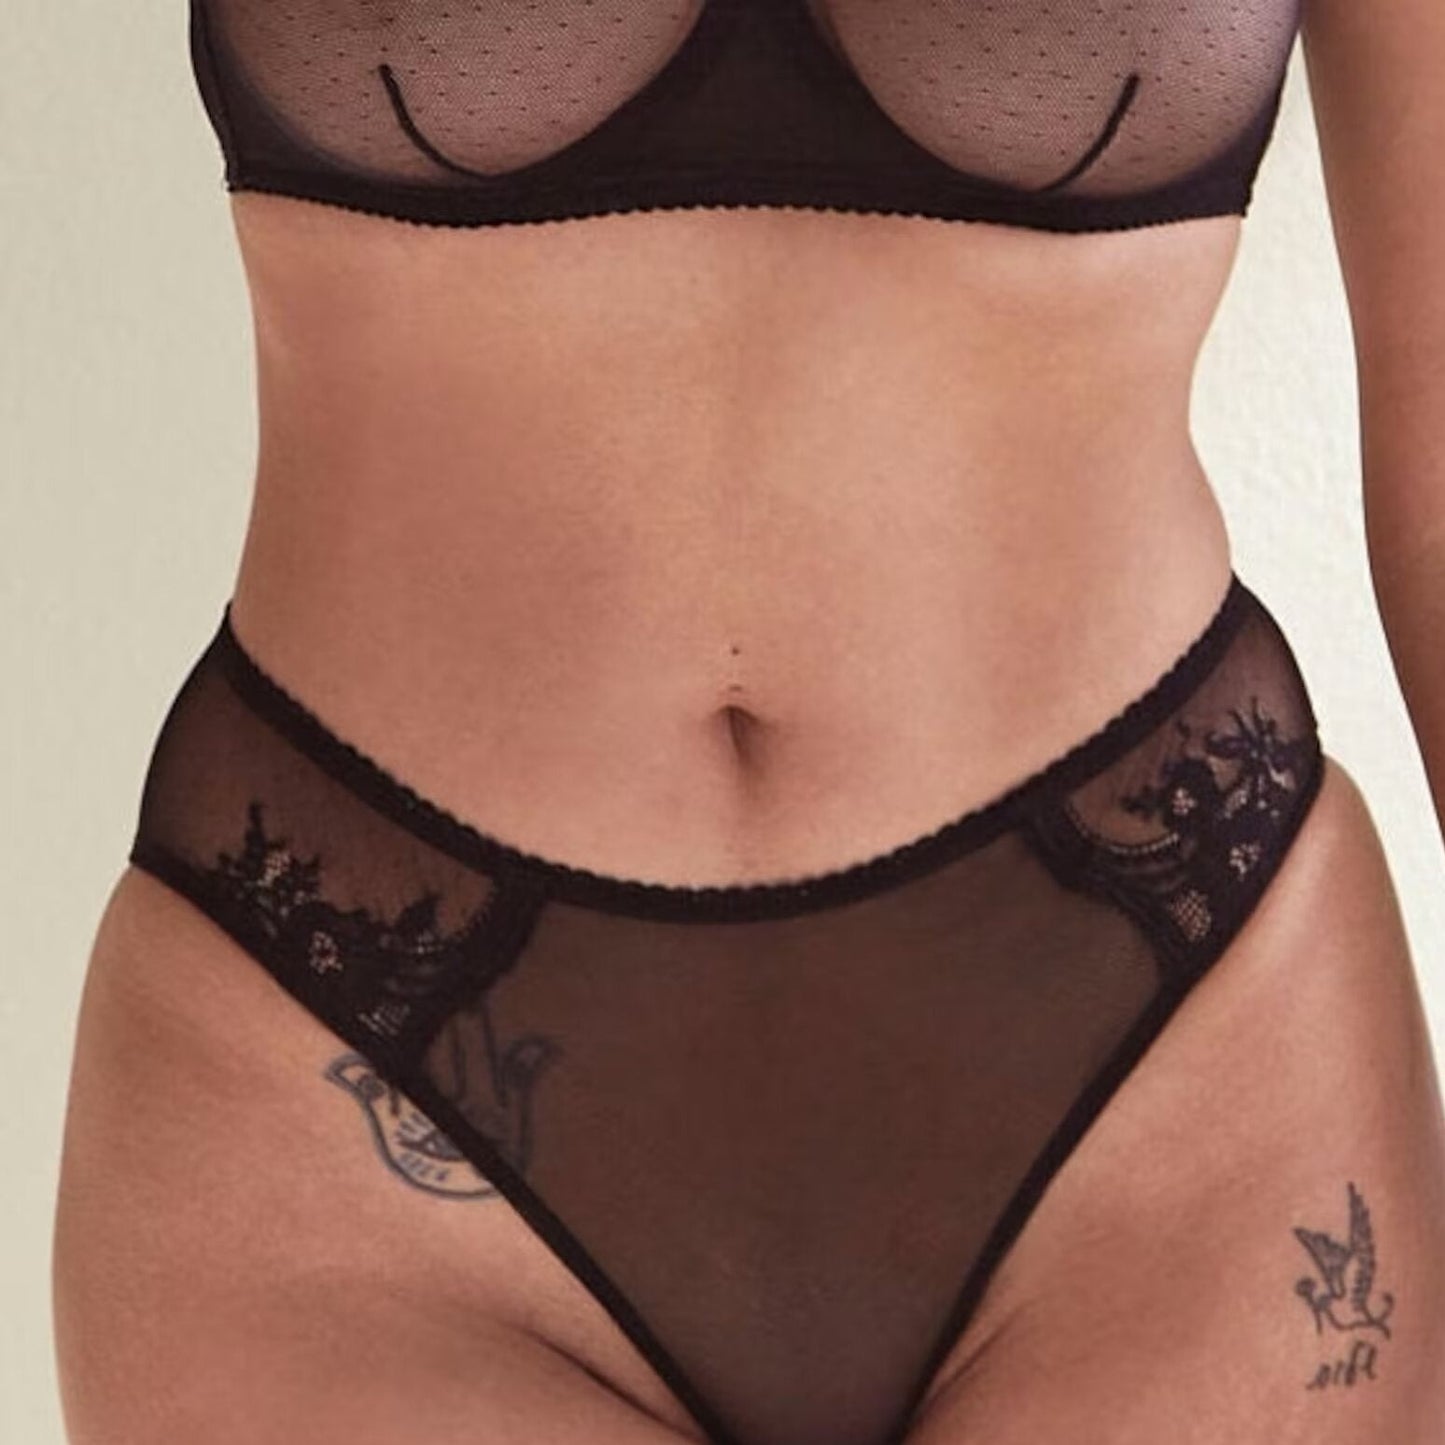 Kim Hipster Brief | Amour Caché Lingerie